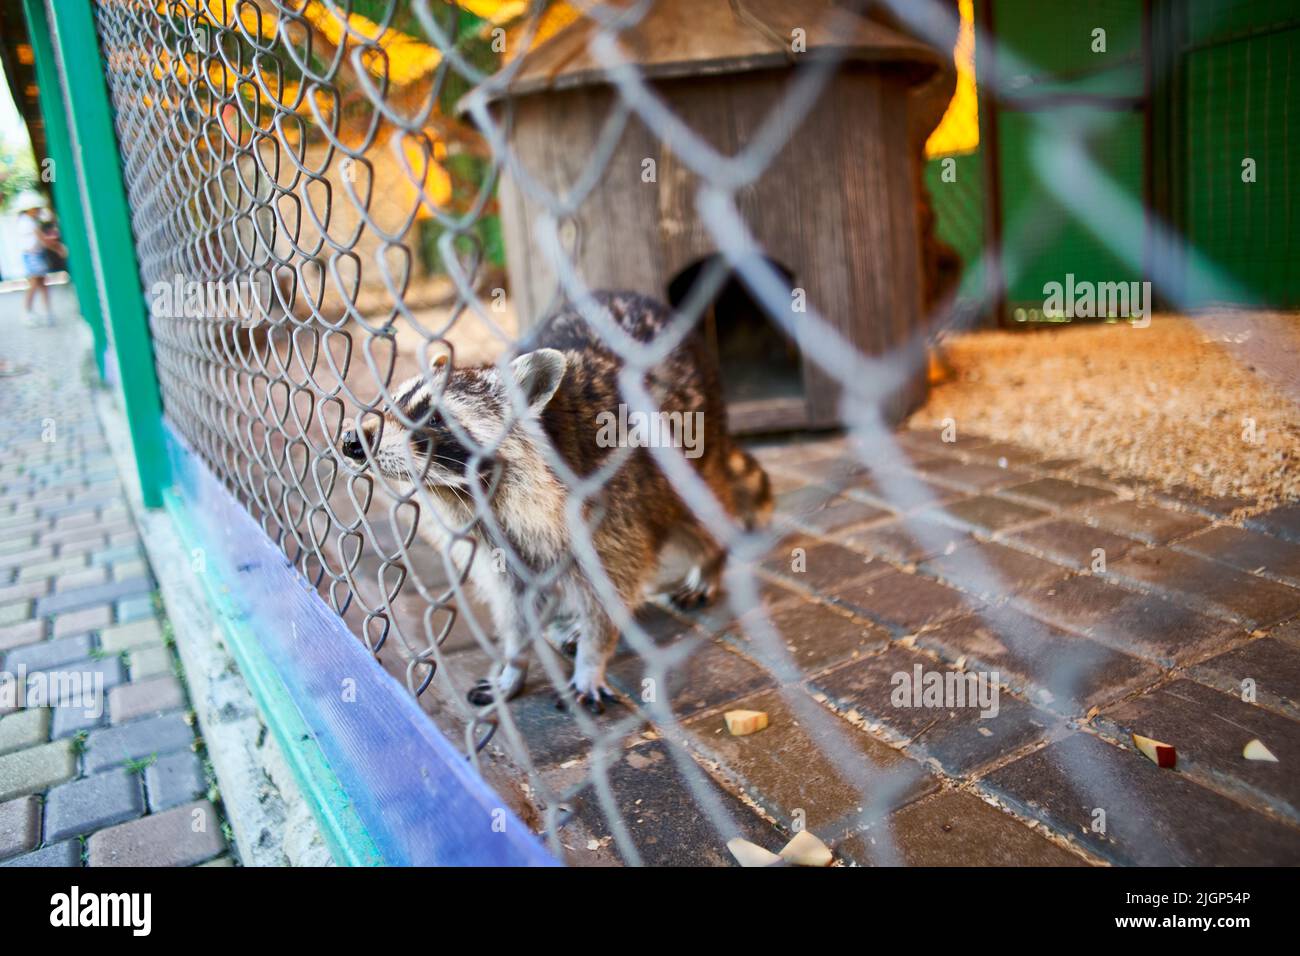 footage of raccoons in the aviary Stock Photo